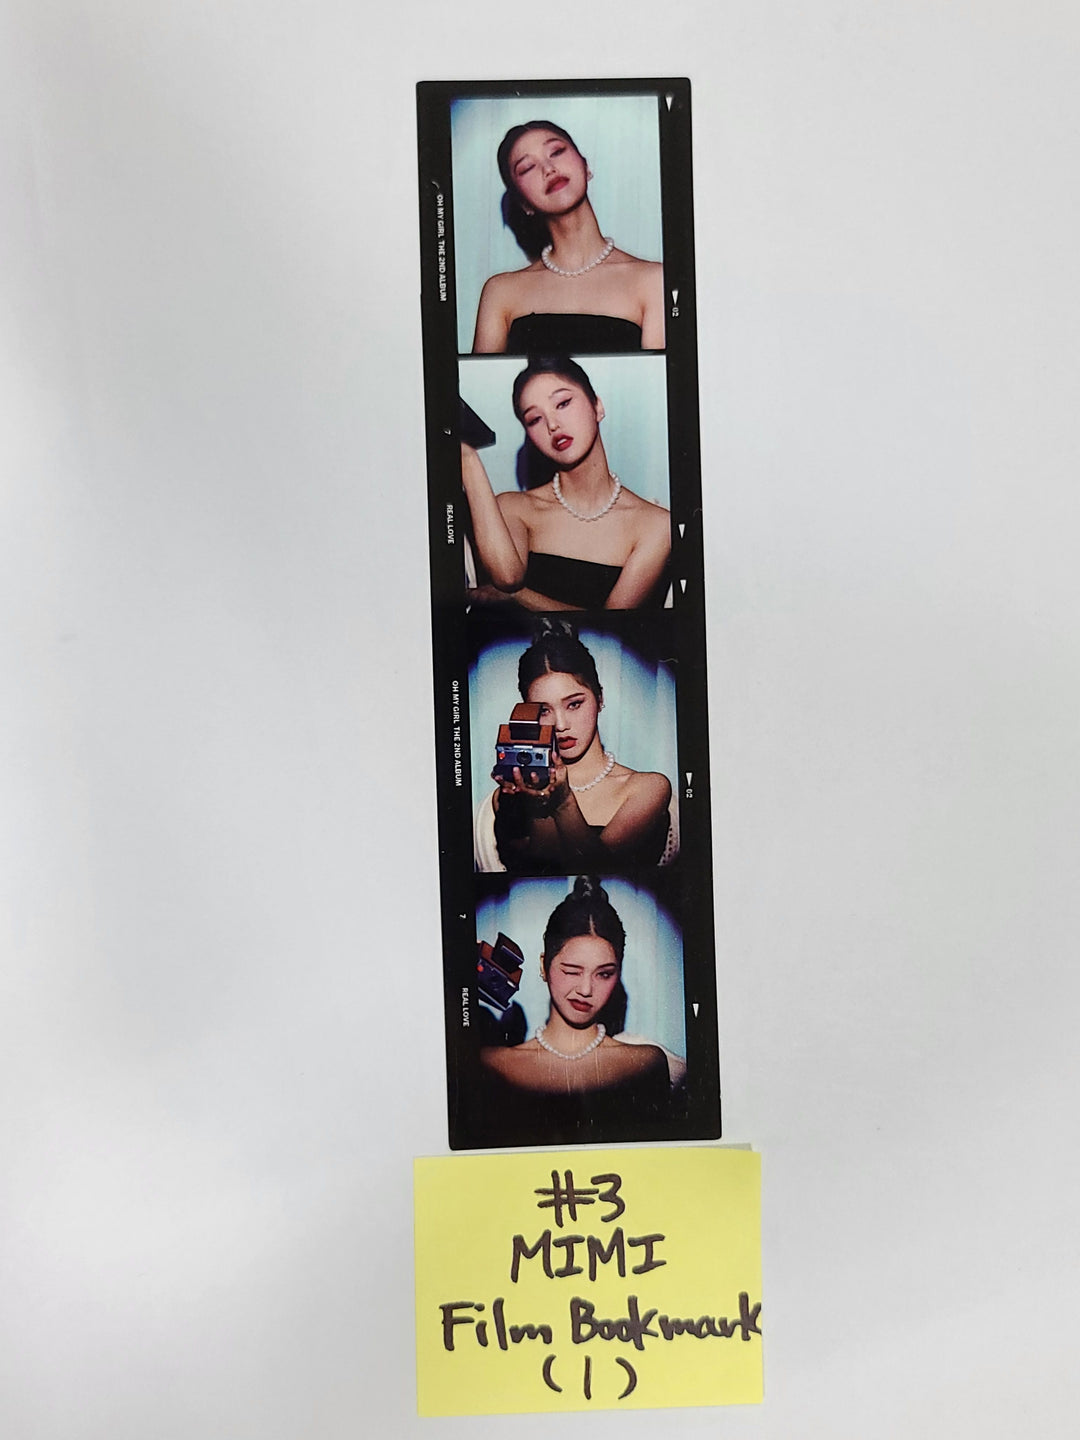 Oh My Girl 'Real Love' - Official Film Bookmark